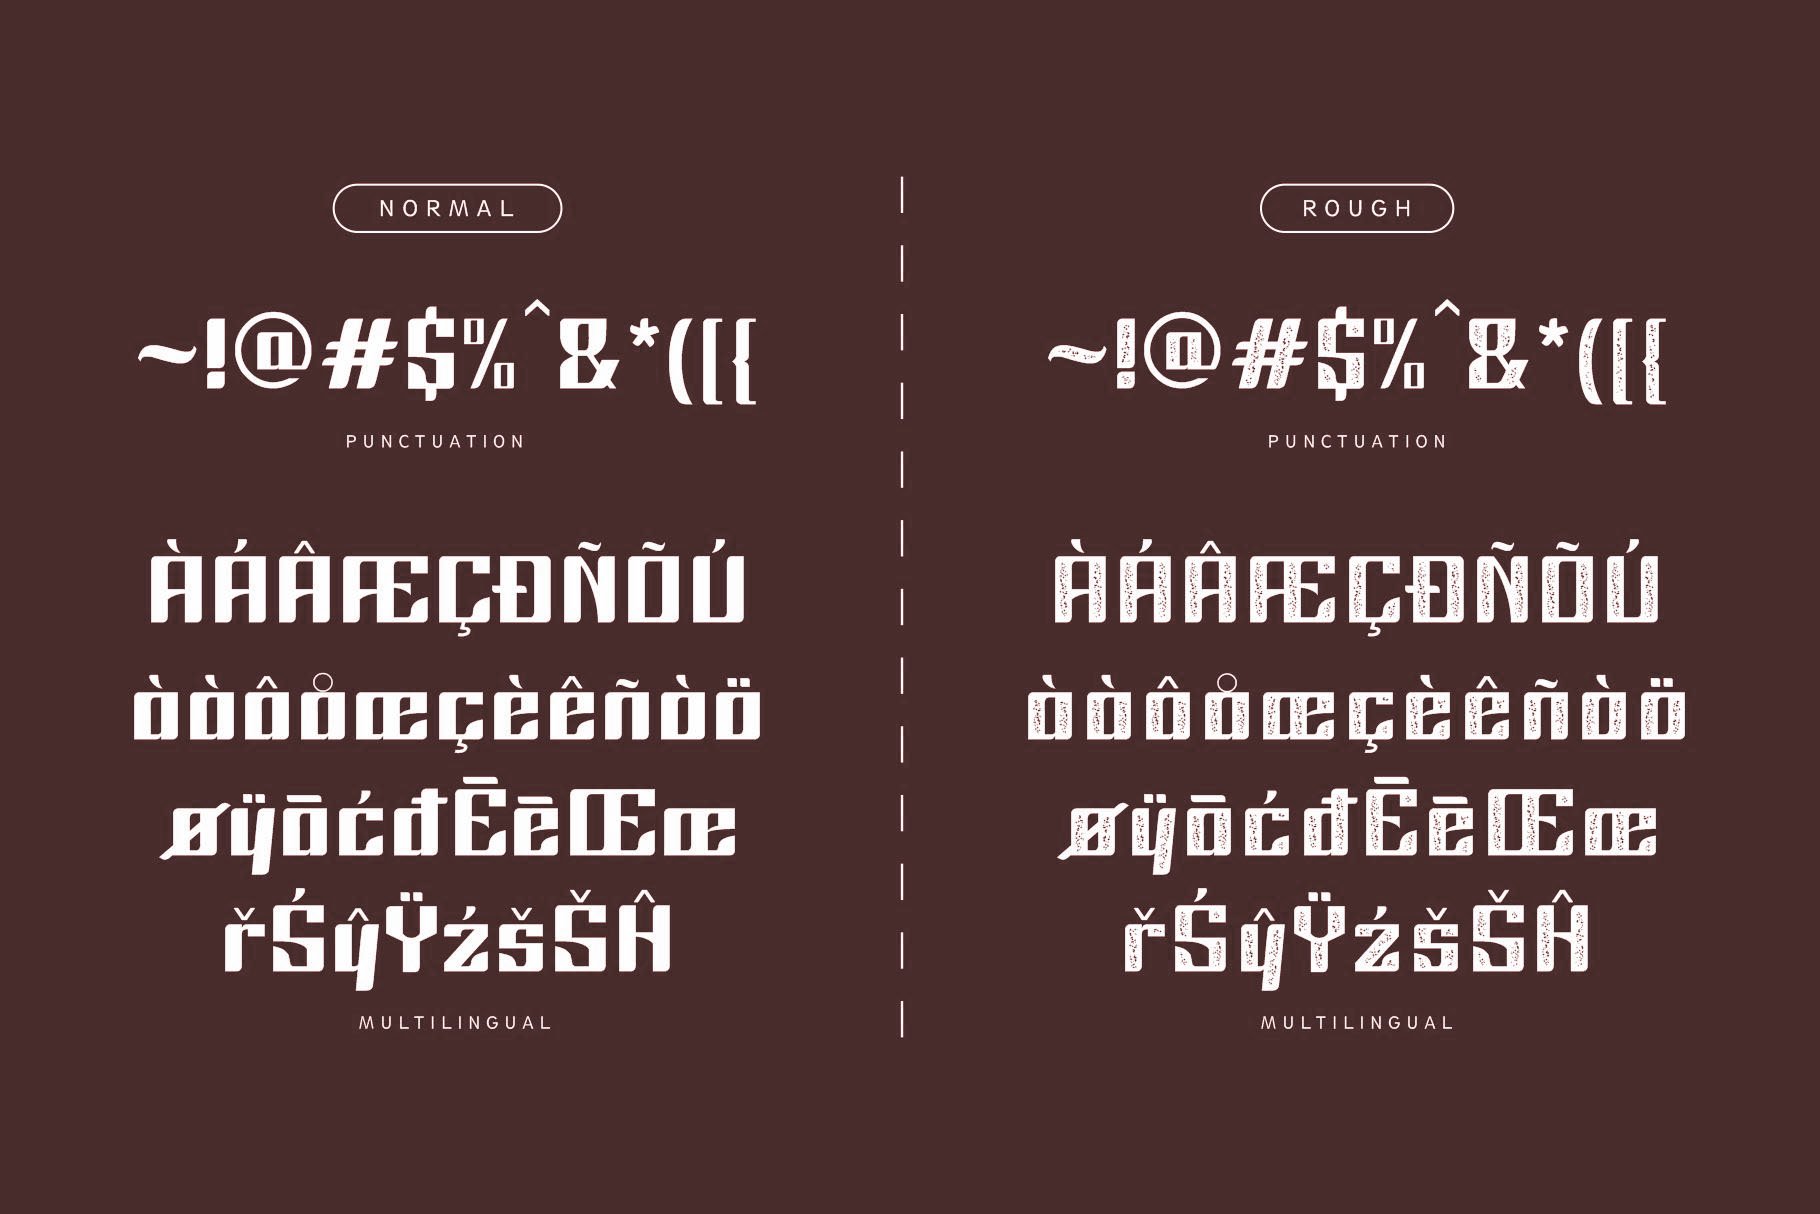 nexhope font preview7 160